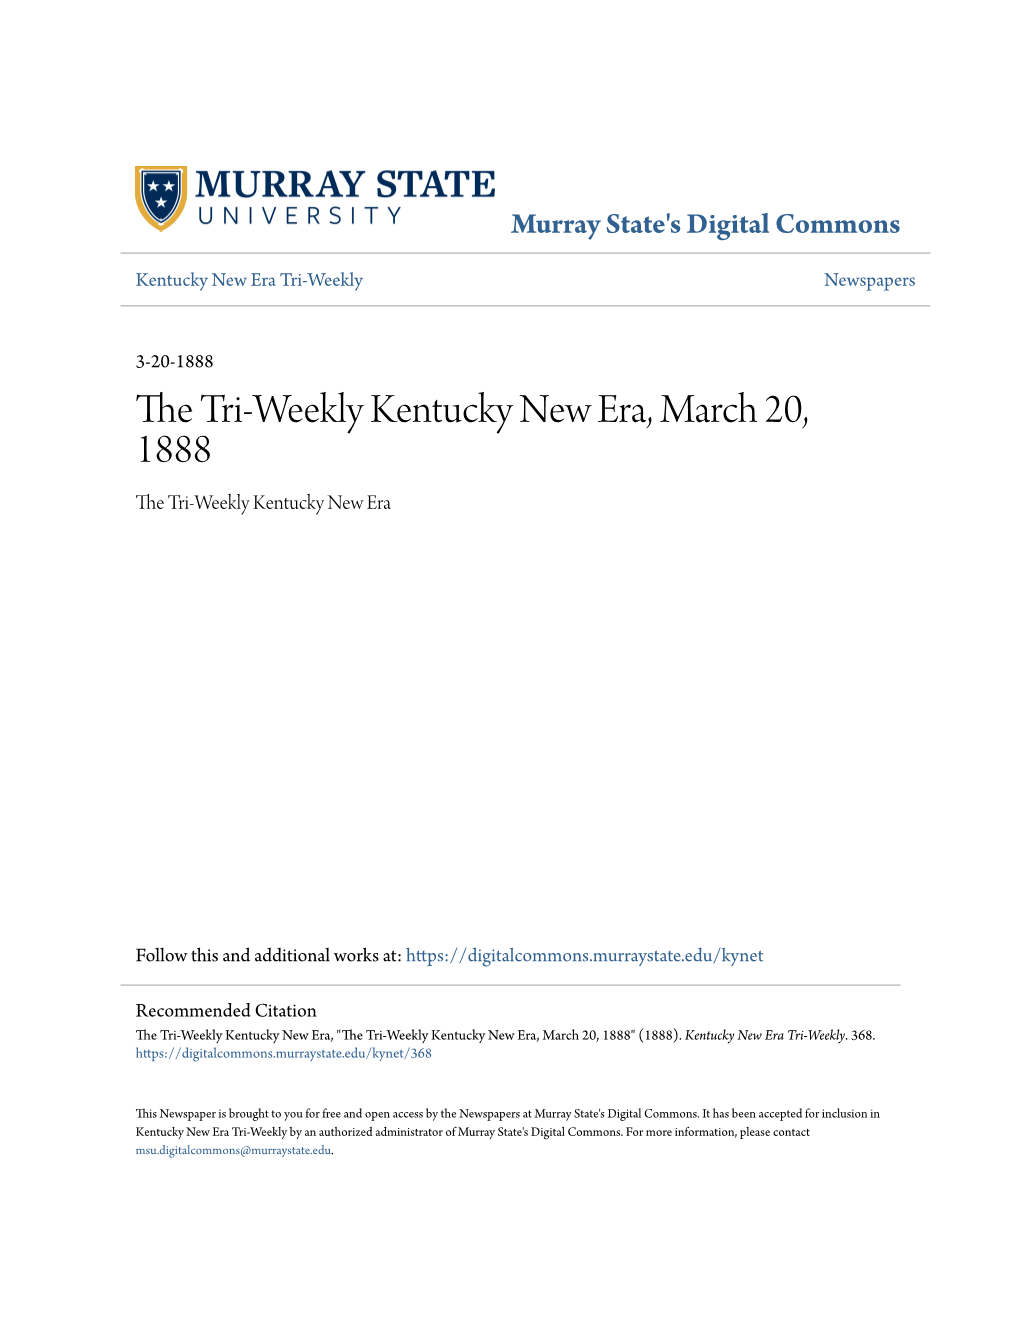 The Tri-Weekly Kentucky New Era, March 20, 1888